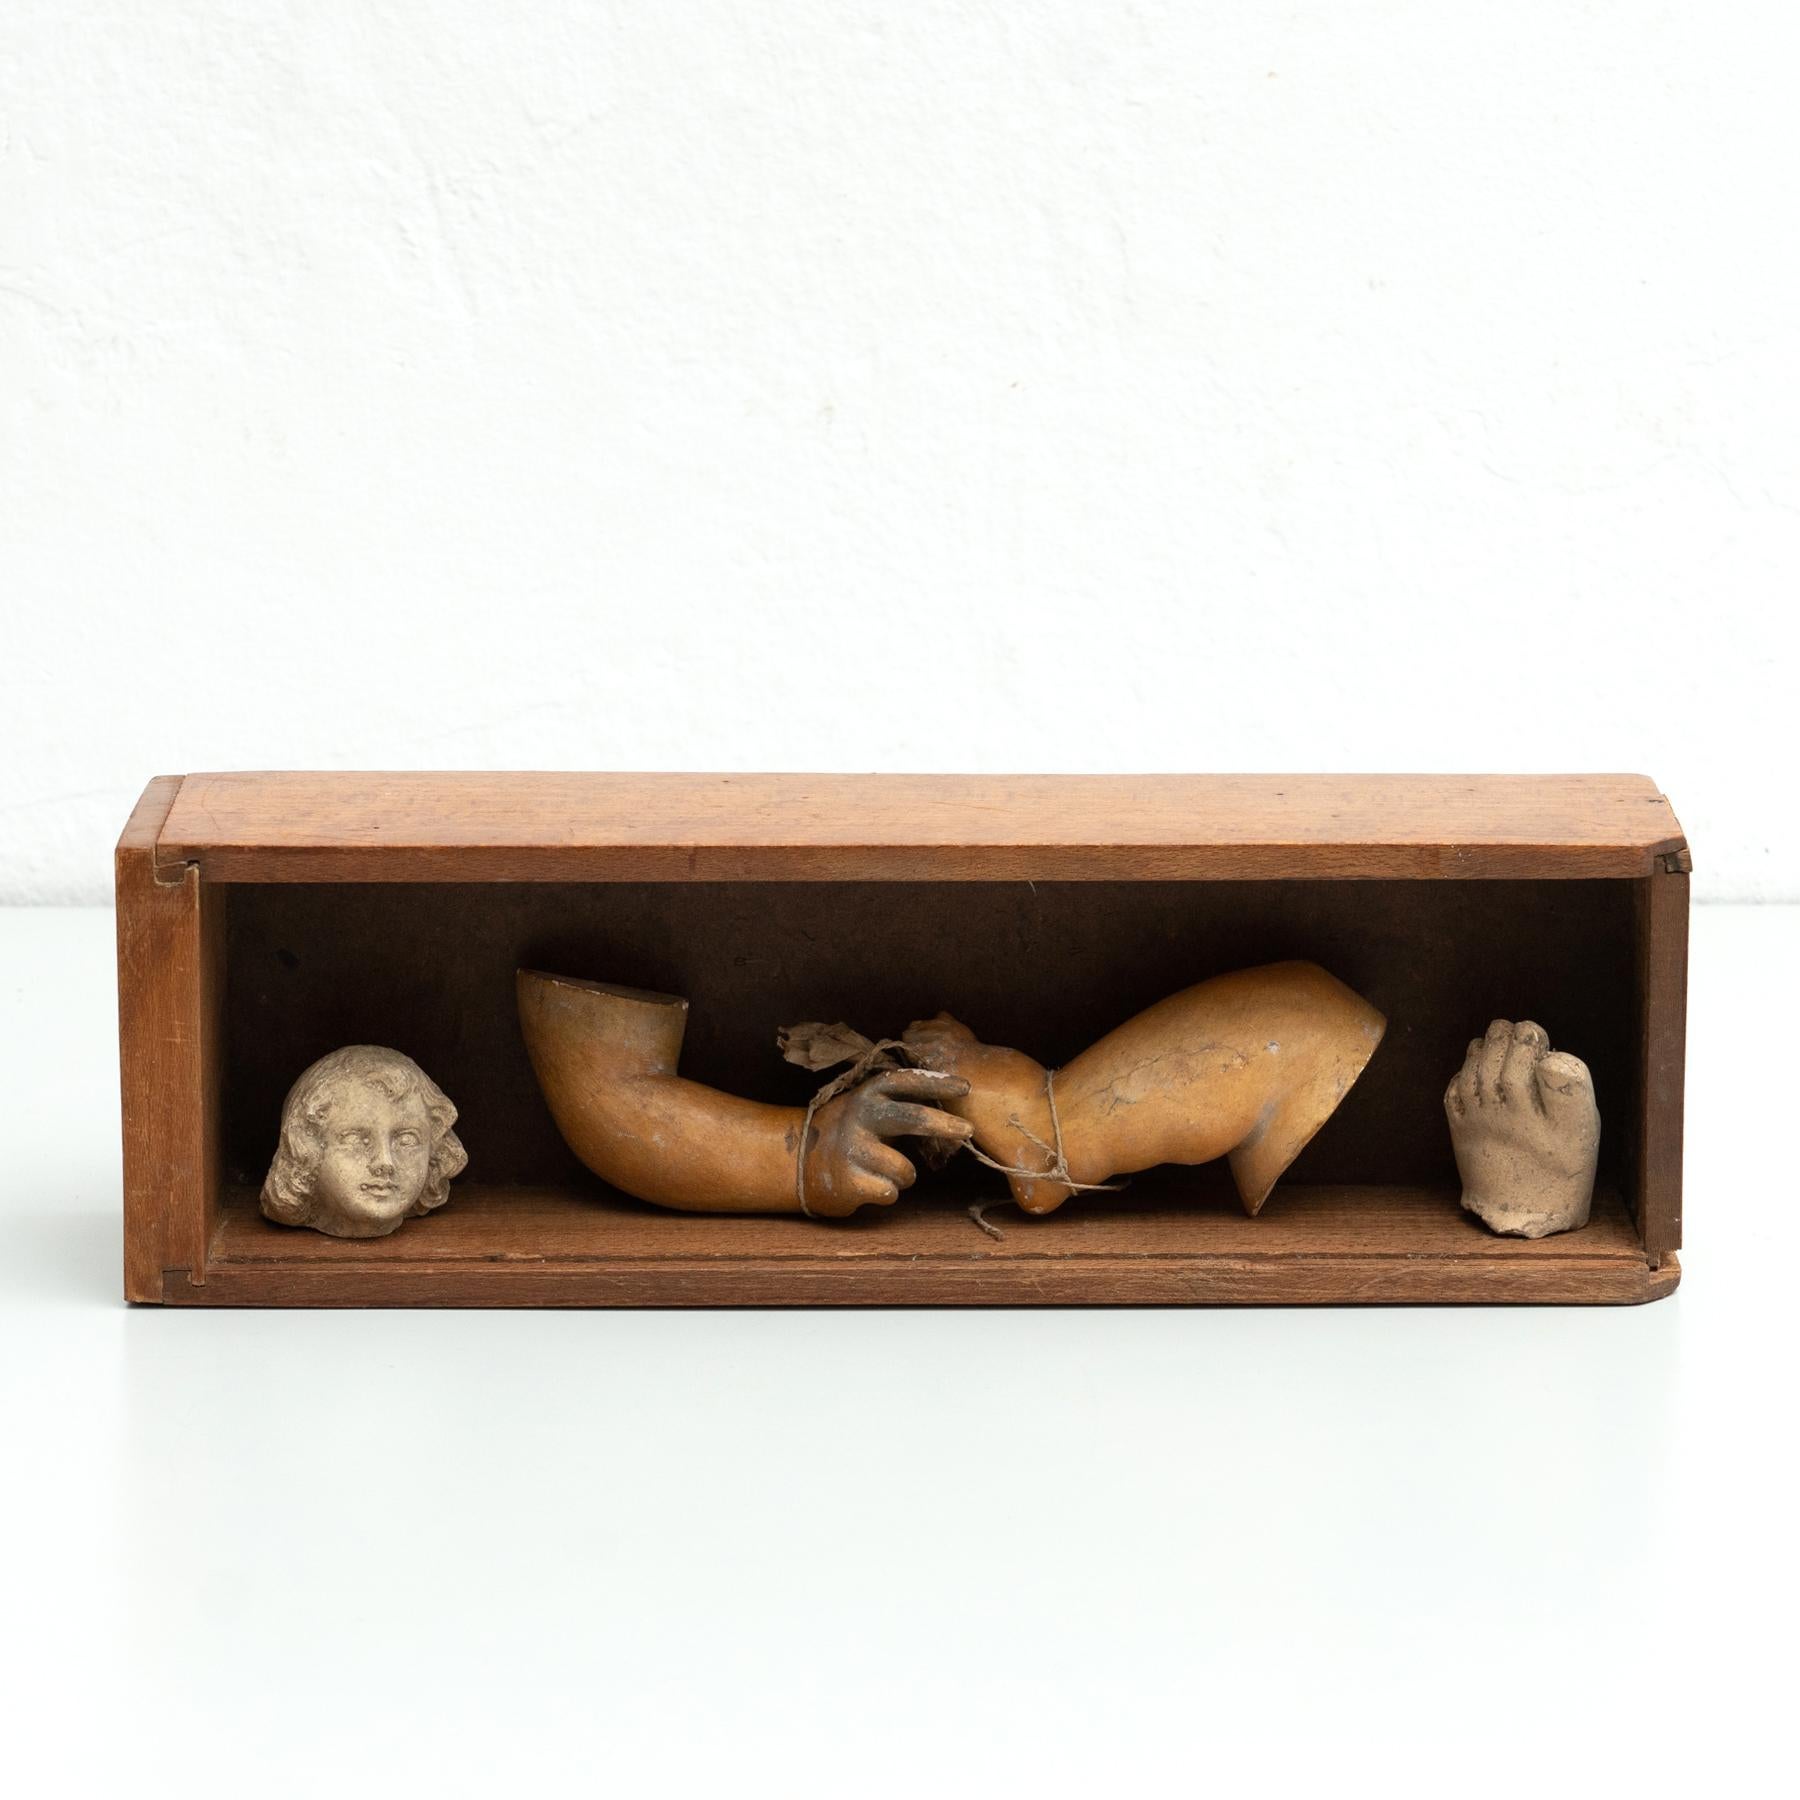 Cabinet of curiosities of plaster figures and pieces in a wooden drawer.

Made in traditional Catalan atelier in Olot, Spain, circa 1950.

Olot has a long tradition in the production of sculptures and religious imagery. The art and industry of